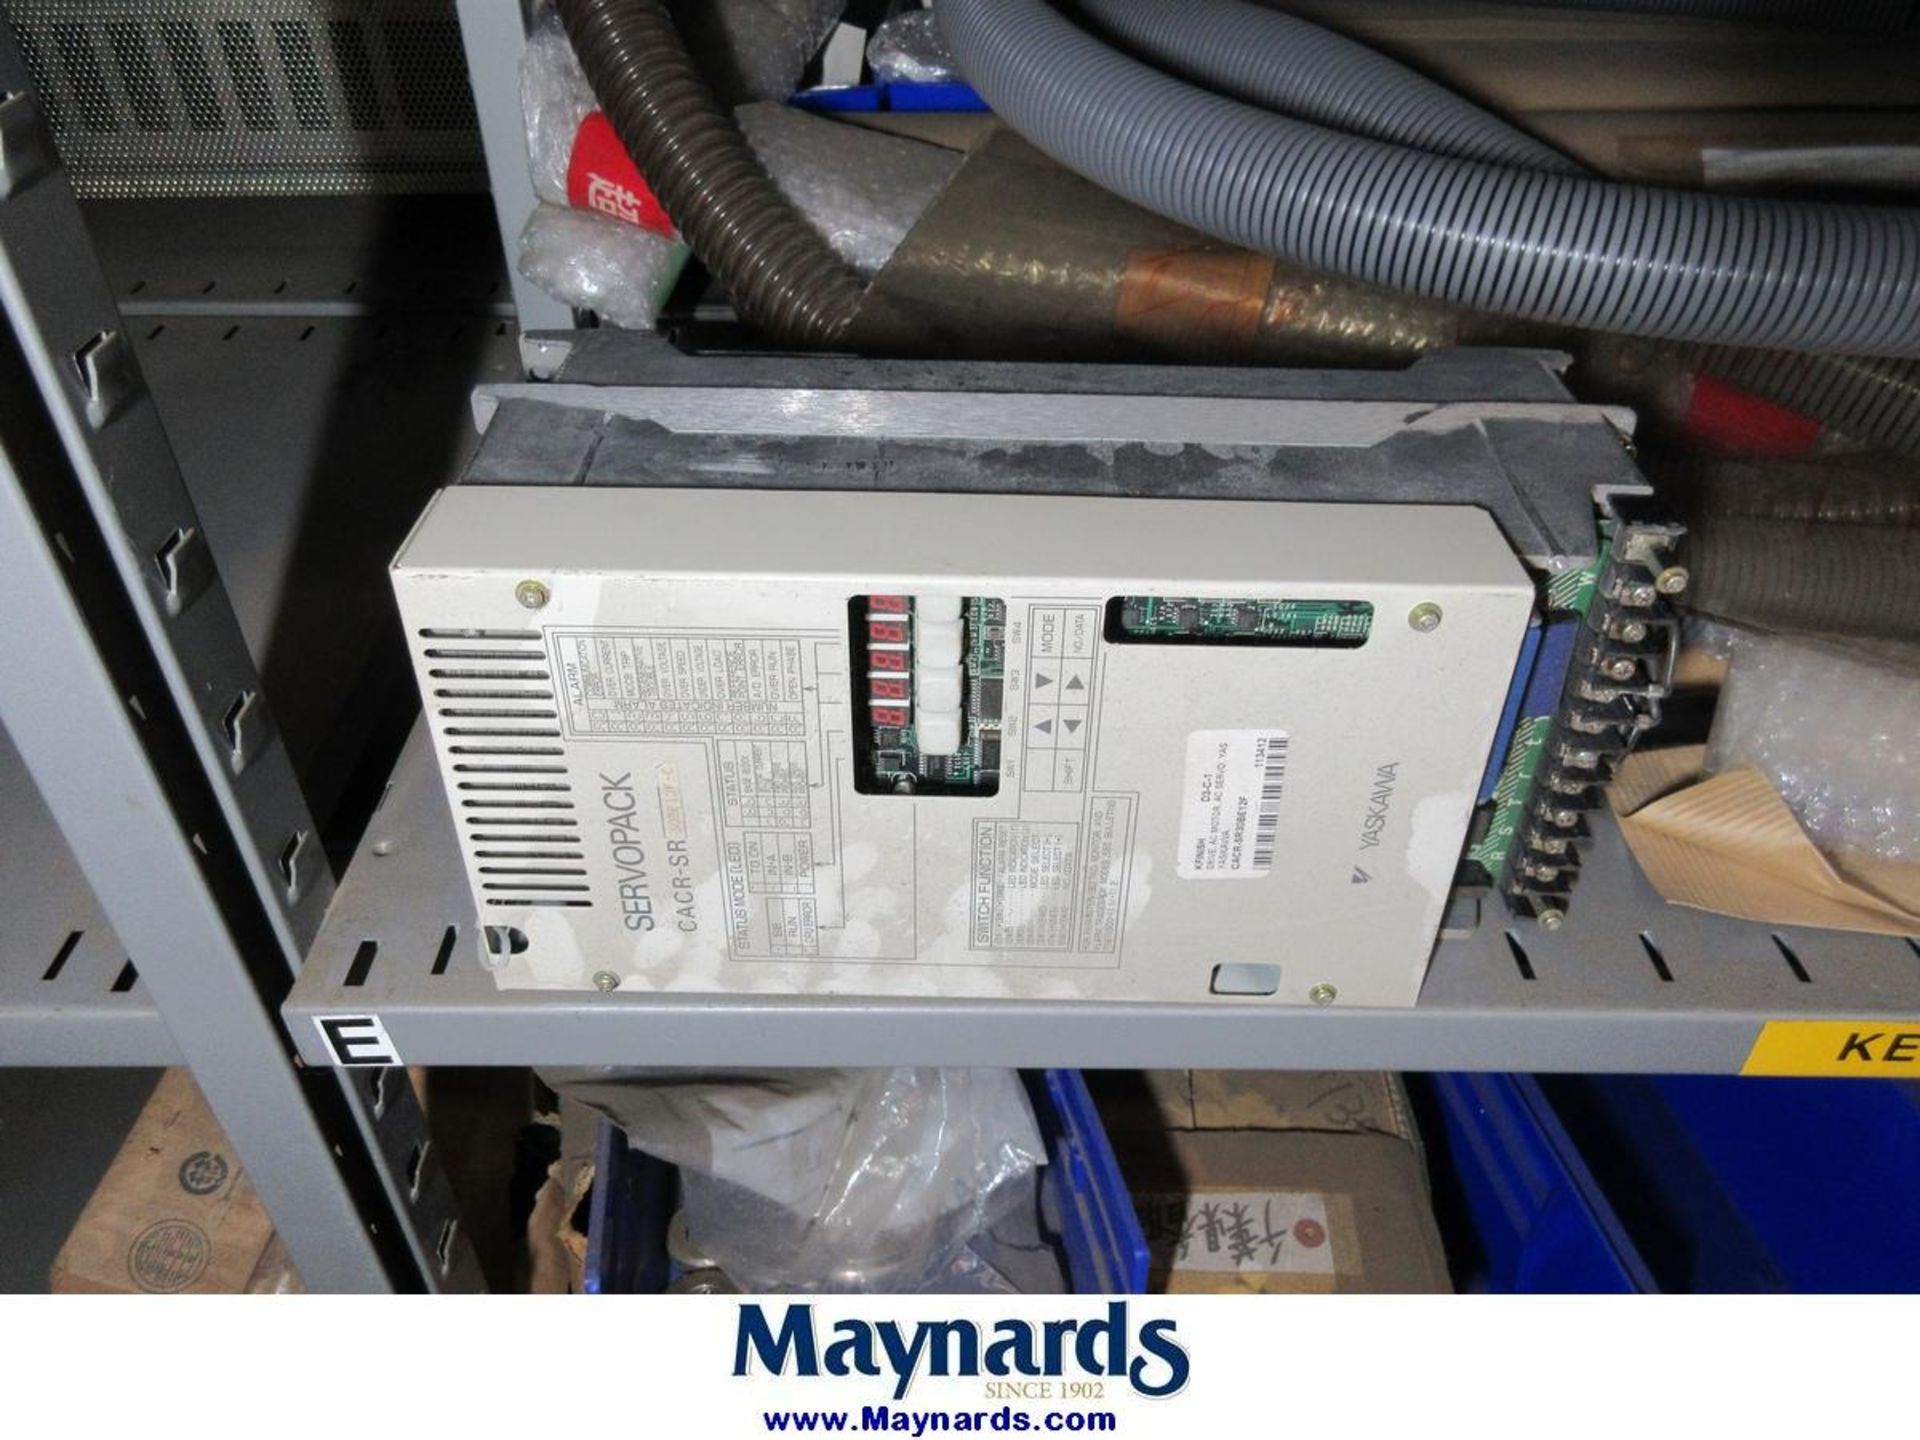 Large Lot of Electrical Controls, PLC's, Drives & Remaining Contents of Maint. Parts Crib - Image 6 of 107